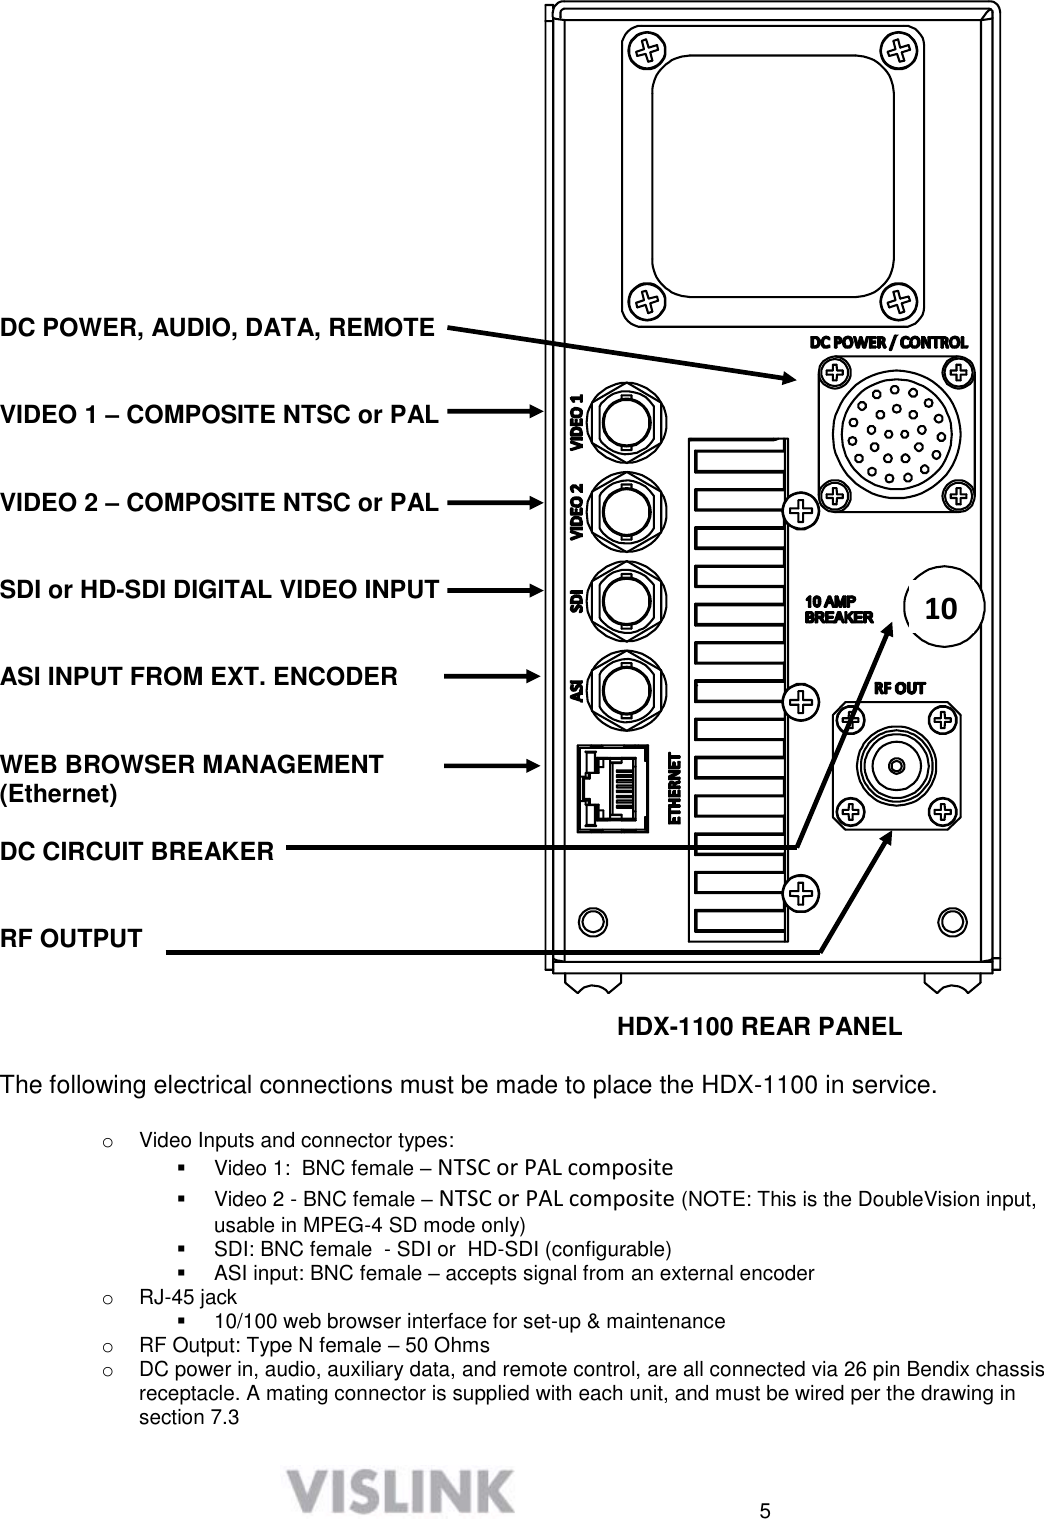  5           DC POWER, AUDIO, DATA, REMOTE   VIDEO 1 – COMPOSITE NTSC or PAL   VIDEO 2 – COMPOSITE NTSC or PAL   SDI or HD-SDI DIGITAL VIDEO INPUT    ASI INPUT FROM EXT. ENCODER   WEB BROWSER MANAGEMENT  (Ethernet)  DC CIRCUIT BREAKER   RF OUTPUT                HDX-1100 REAR PANEL  The following electrical connections must be made to place the HDX-1100 in service.   o  Video Inputs and connector types:   Video 1:  BNC female – NTSC or PAL composite   Video 2 - BNC female – NTSC or PAL composite (NOTE: This is the DoubleVision input, usable in MPEG-4 SD mode only)   SDI: BNC female  - SDI or  HD-SDI (configurable)   ASI input: BNC female – accepts signal from an external encoder o RJ-45 jack   10/100 web browser interface for set-up &amp; maintenance o  RF Output: Type N female – 50 Ohms o  DC power in, audio, auxiliary data, and remote control, are all connected via 26 pin Bendix chassis receptacle. A mating connector is supplied with each unit, and must be wired per the drawing in section 7.3   10 